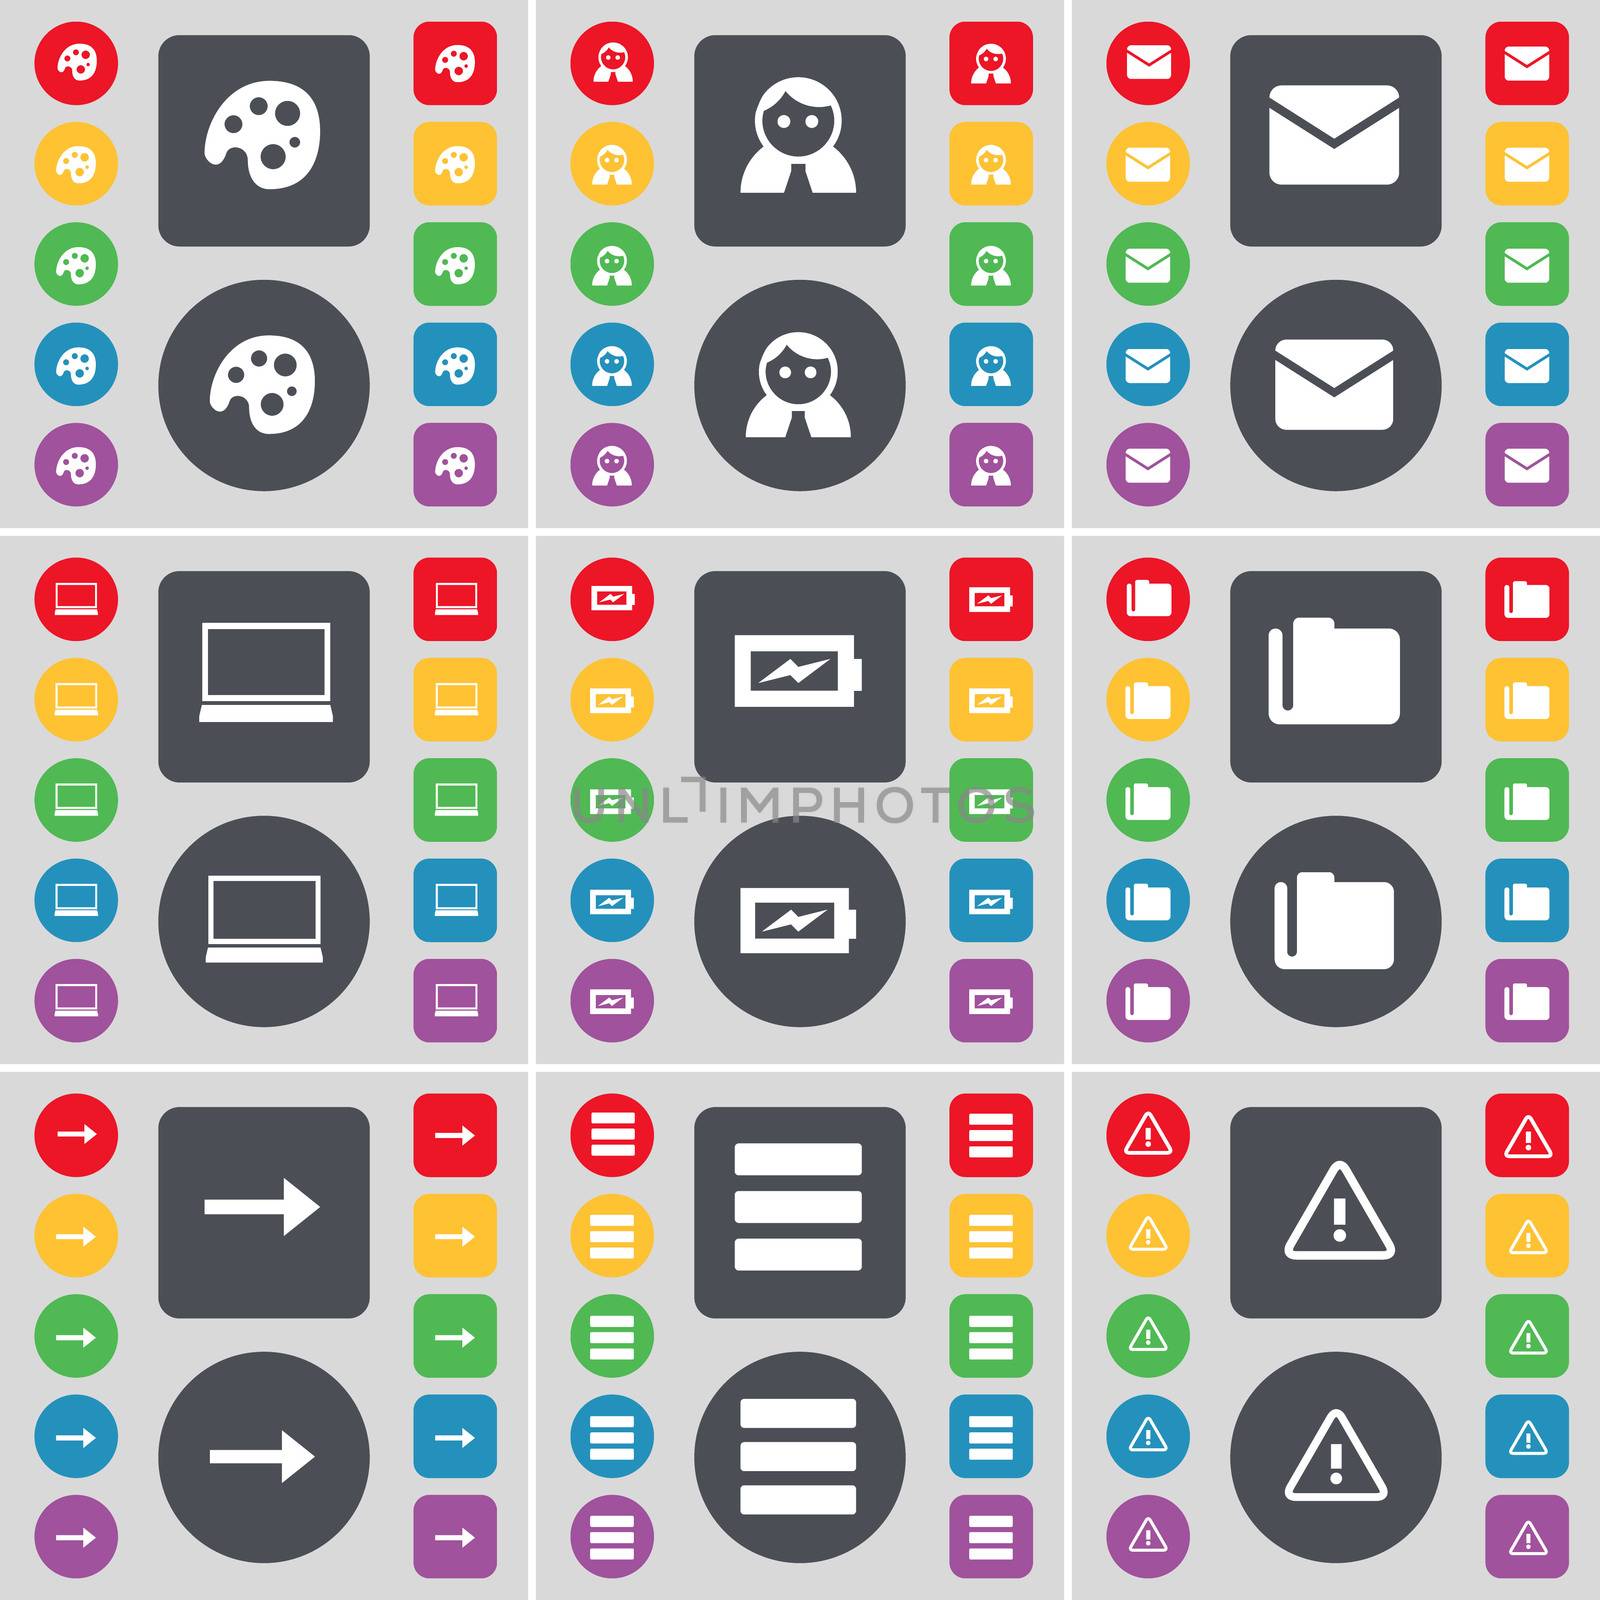 Palette, Avatar, Message, Laptop, Charging, Folder, Arrow right, Apps, Warning icon symbol. A large set of flat, colored buttons for your design.  by serhii_lohvyniuk